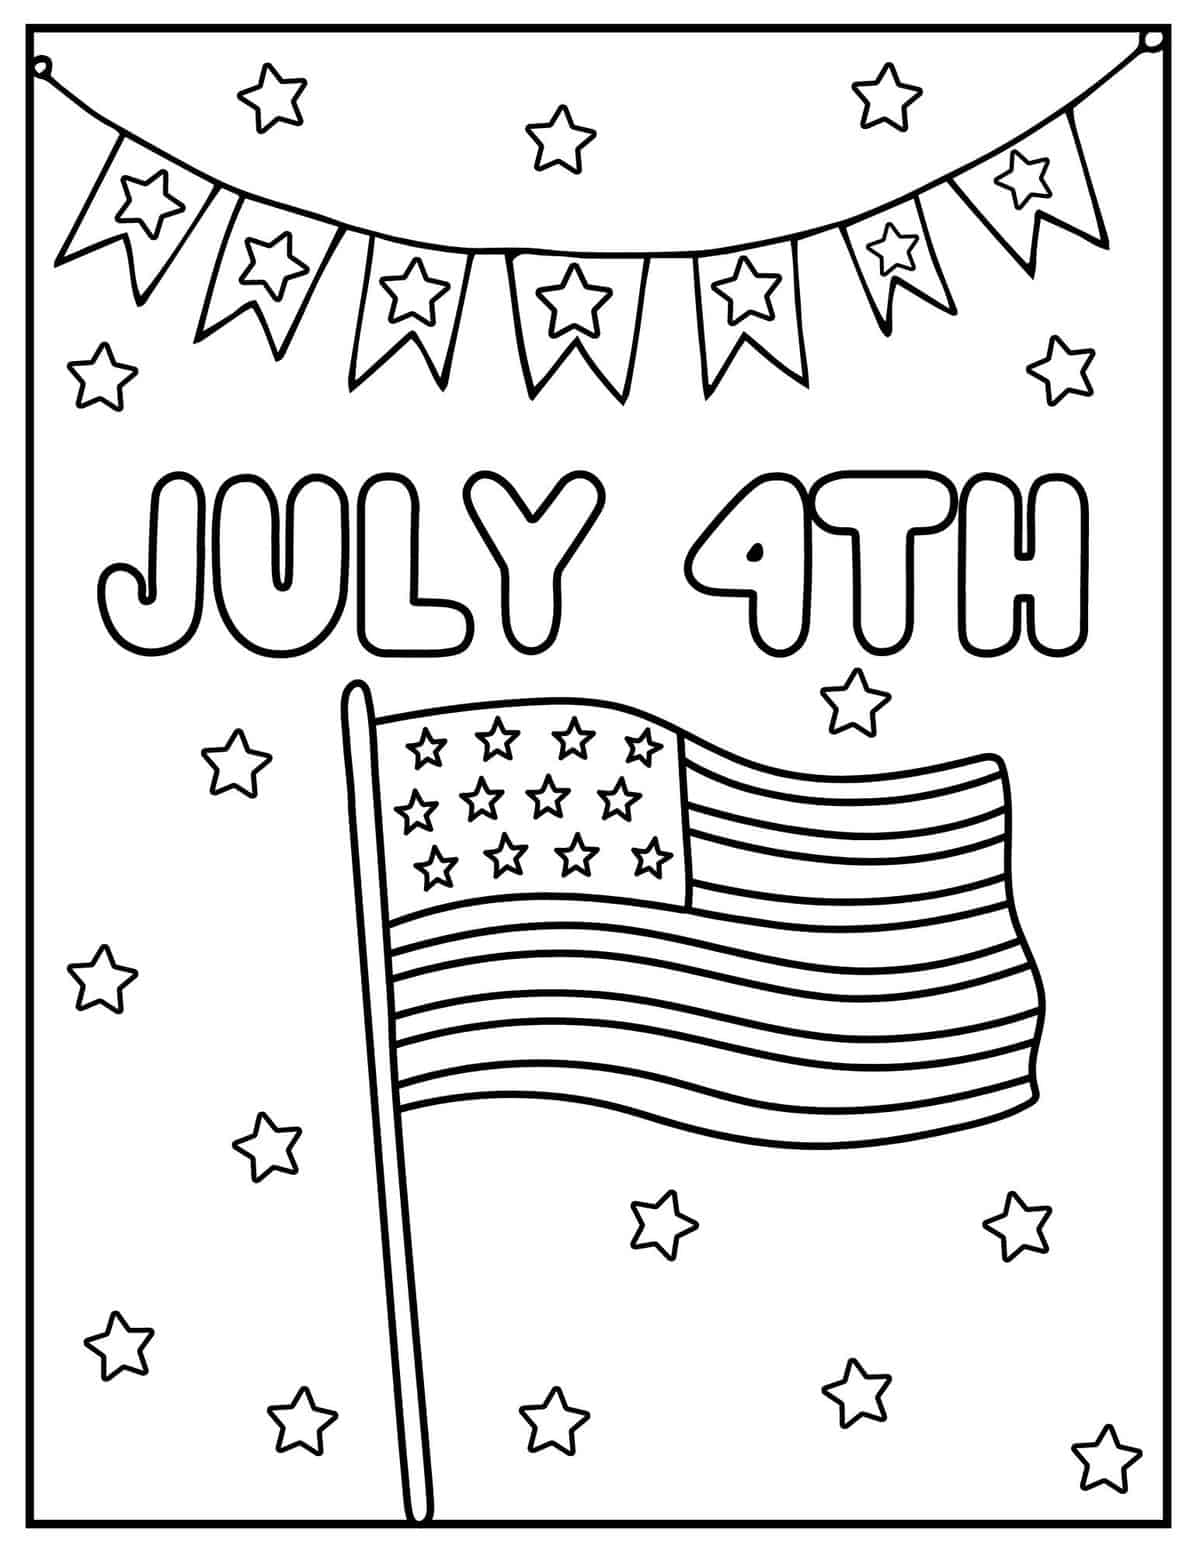 July 4th coloring page with us flag and star banner